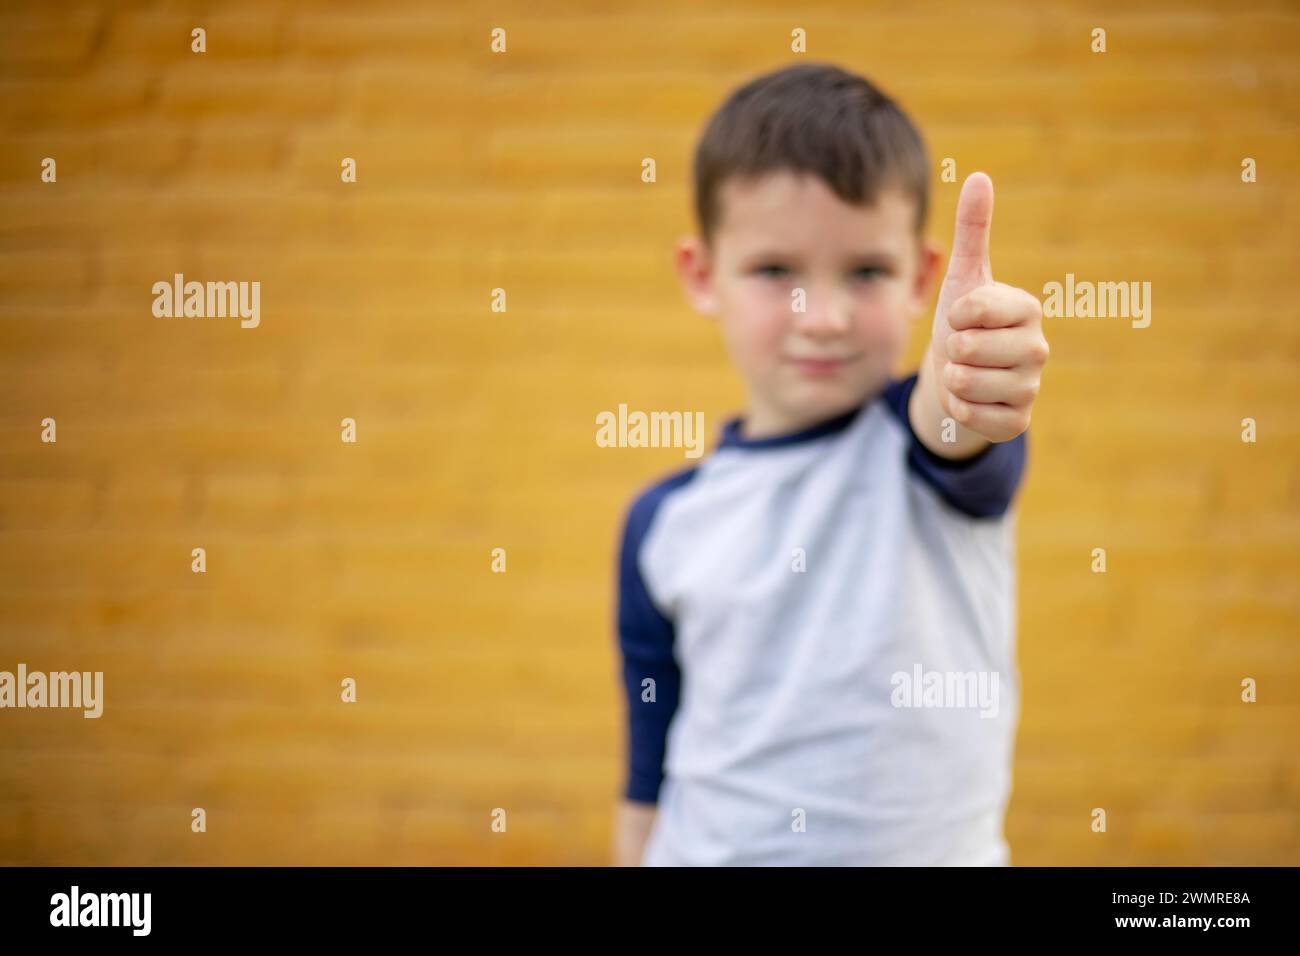 Boy Giving Thumbs Up to Camera Stock Photo